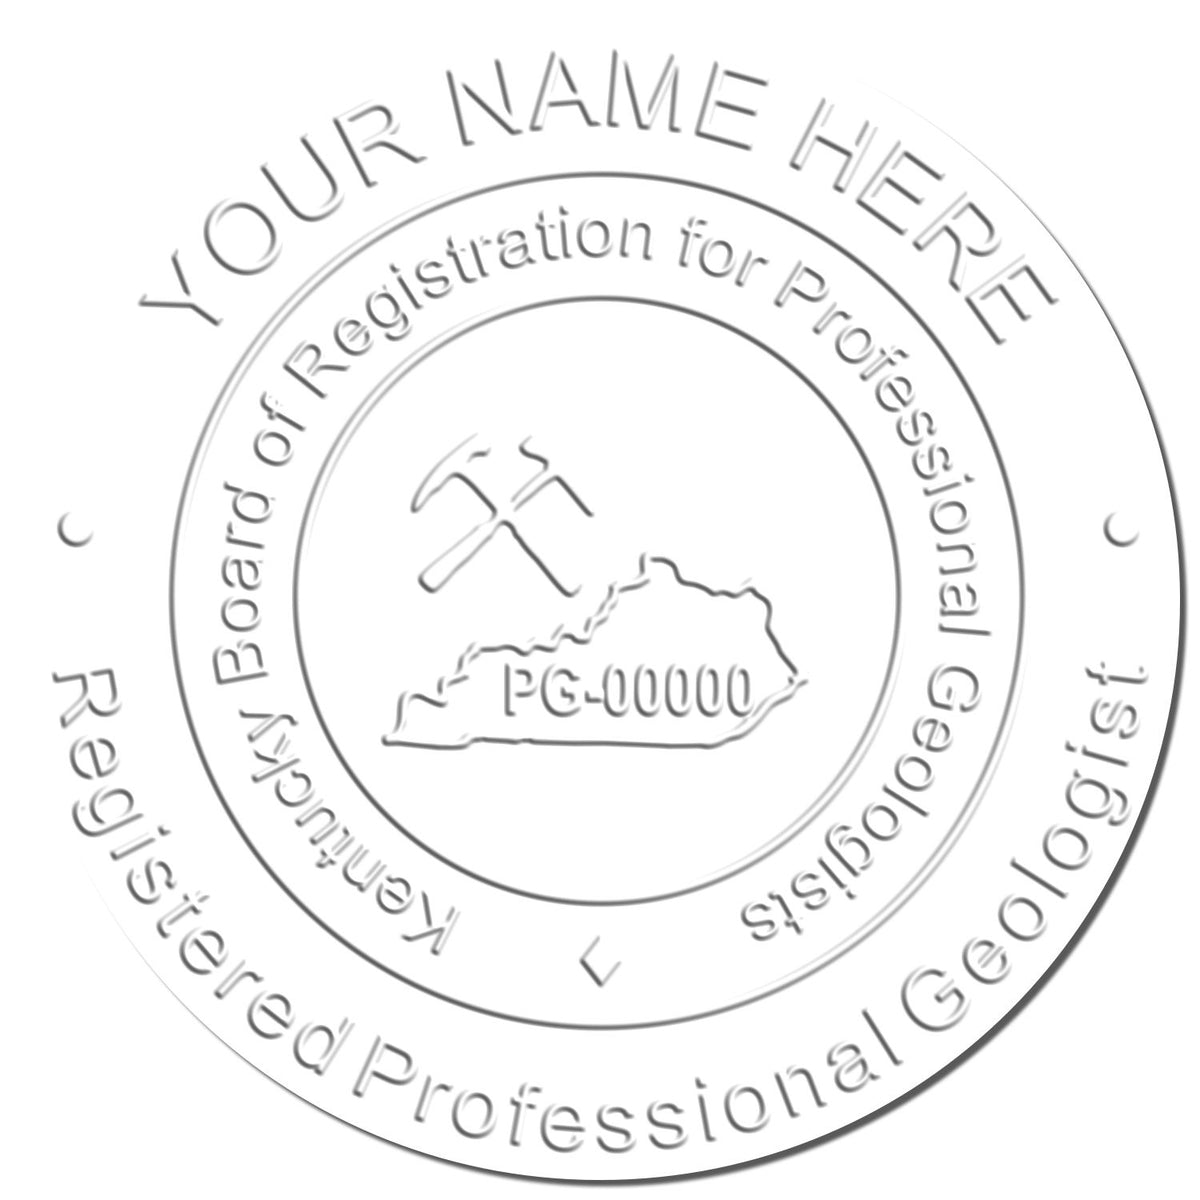 The Kentucky Geologist Desk Seal stamp impression comes to life with a crisp, detailed image stamped on paper - showcasing true professional quality.